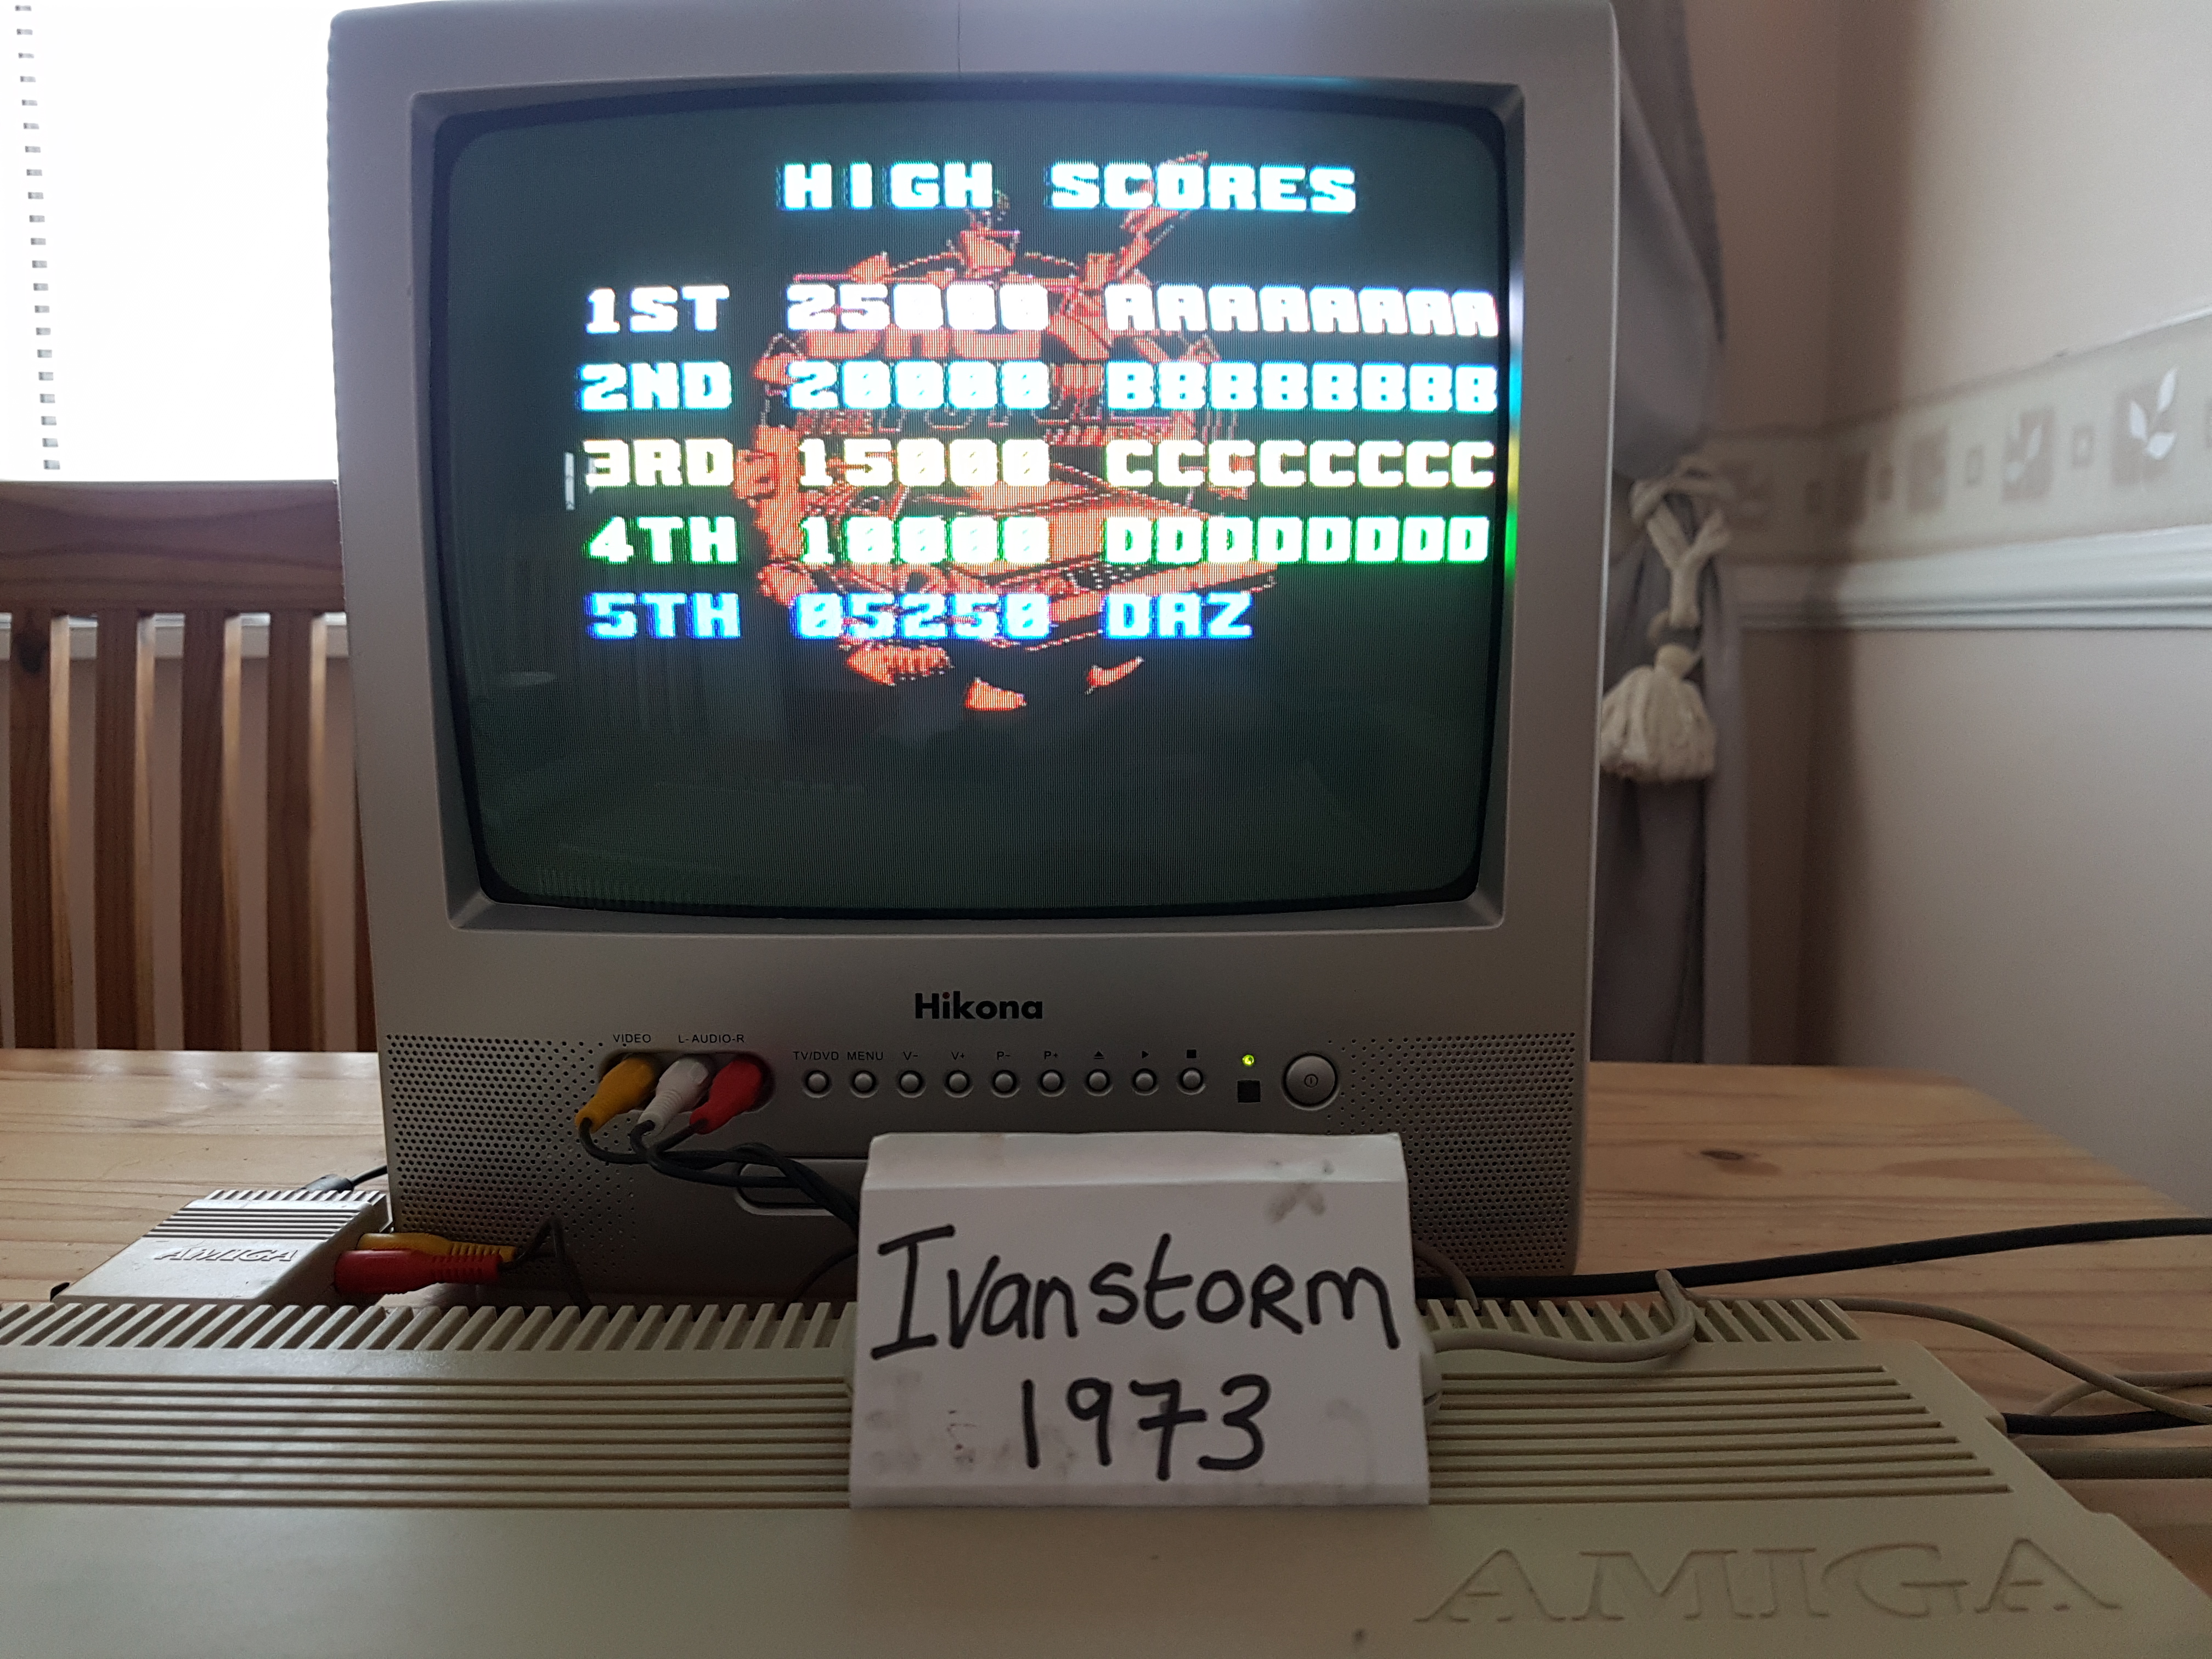 Ivanstorm1973: Back to the Future Part II (Amiga Emulated) 5,250 points on 2018-01-21 08:44:14